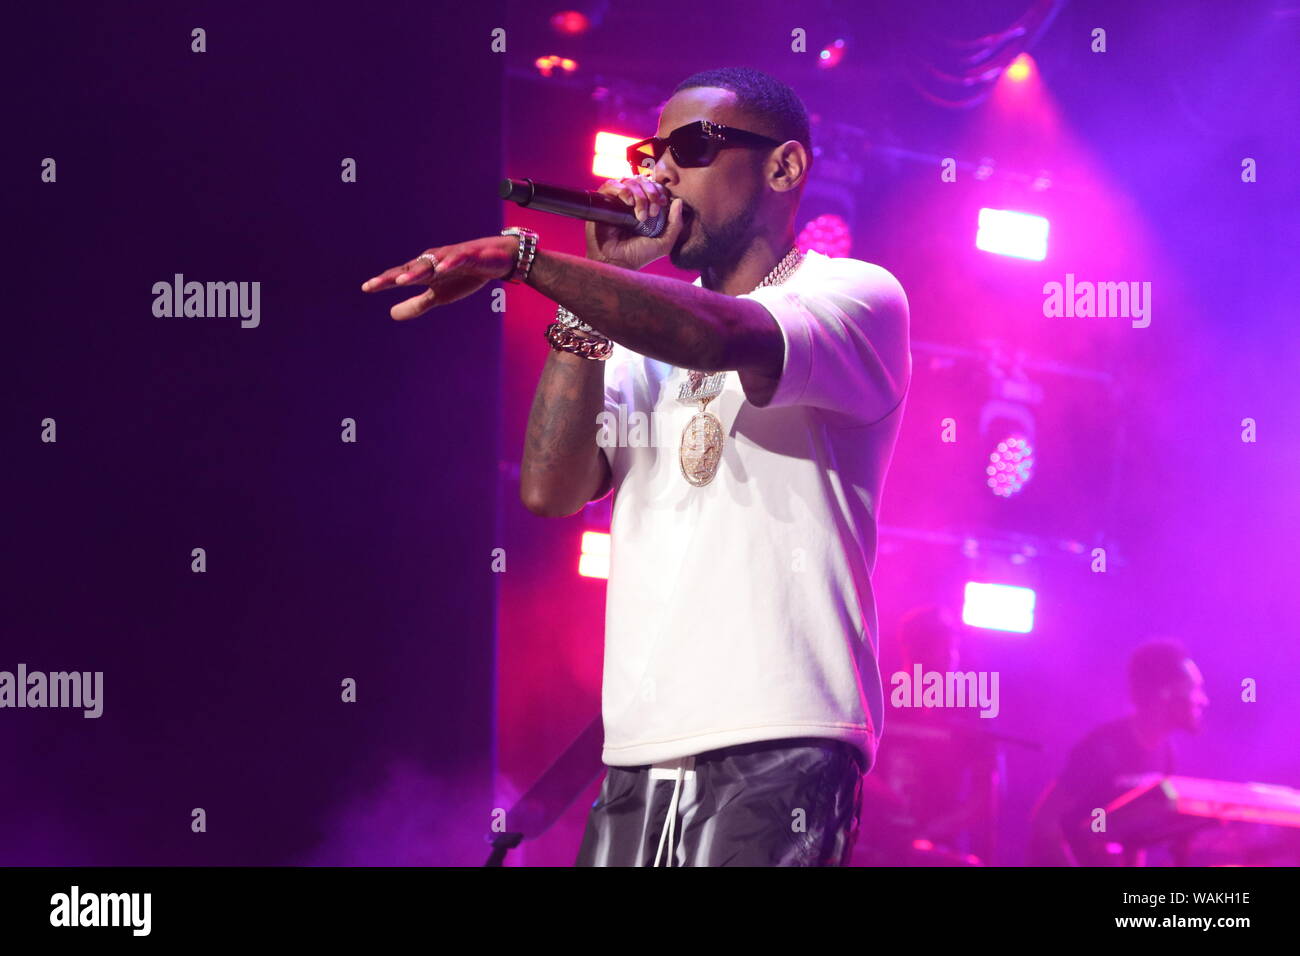 New York, NY, USA. 20th Aug, 2019. Fabolous backstage at the Power Season 6 Premiere August 20, 2019 at Madison Square Garden in New York City. Photo Credit: Walik Goshorn/Mediapunch/Alamy Live News Stock Photo